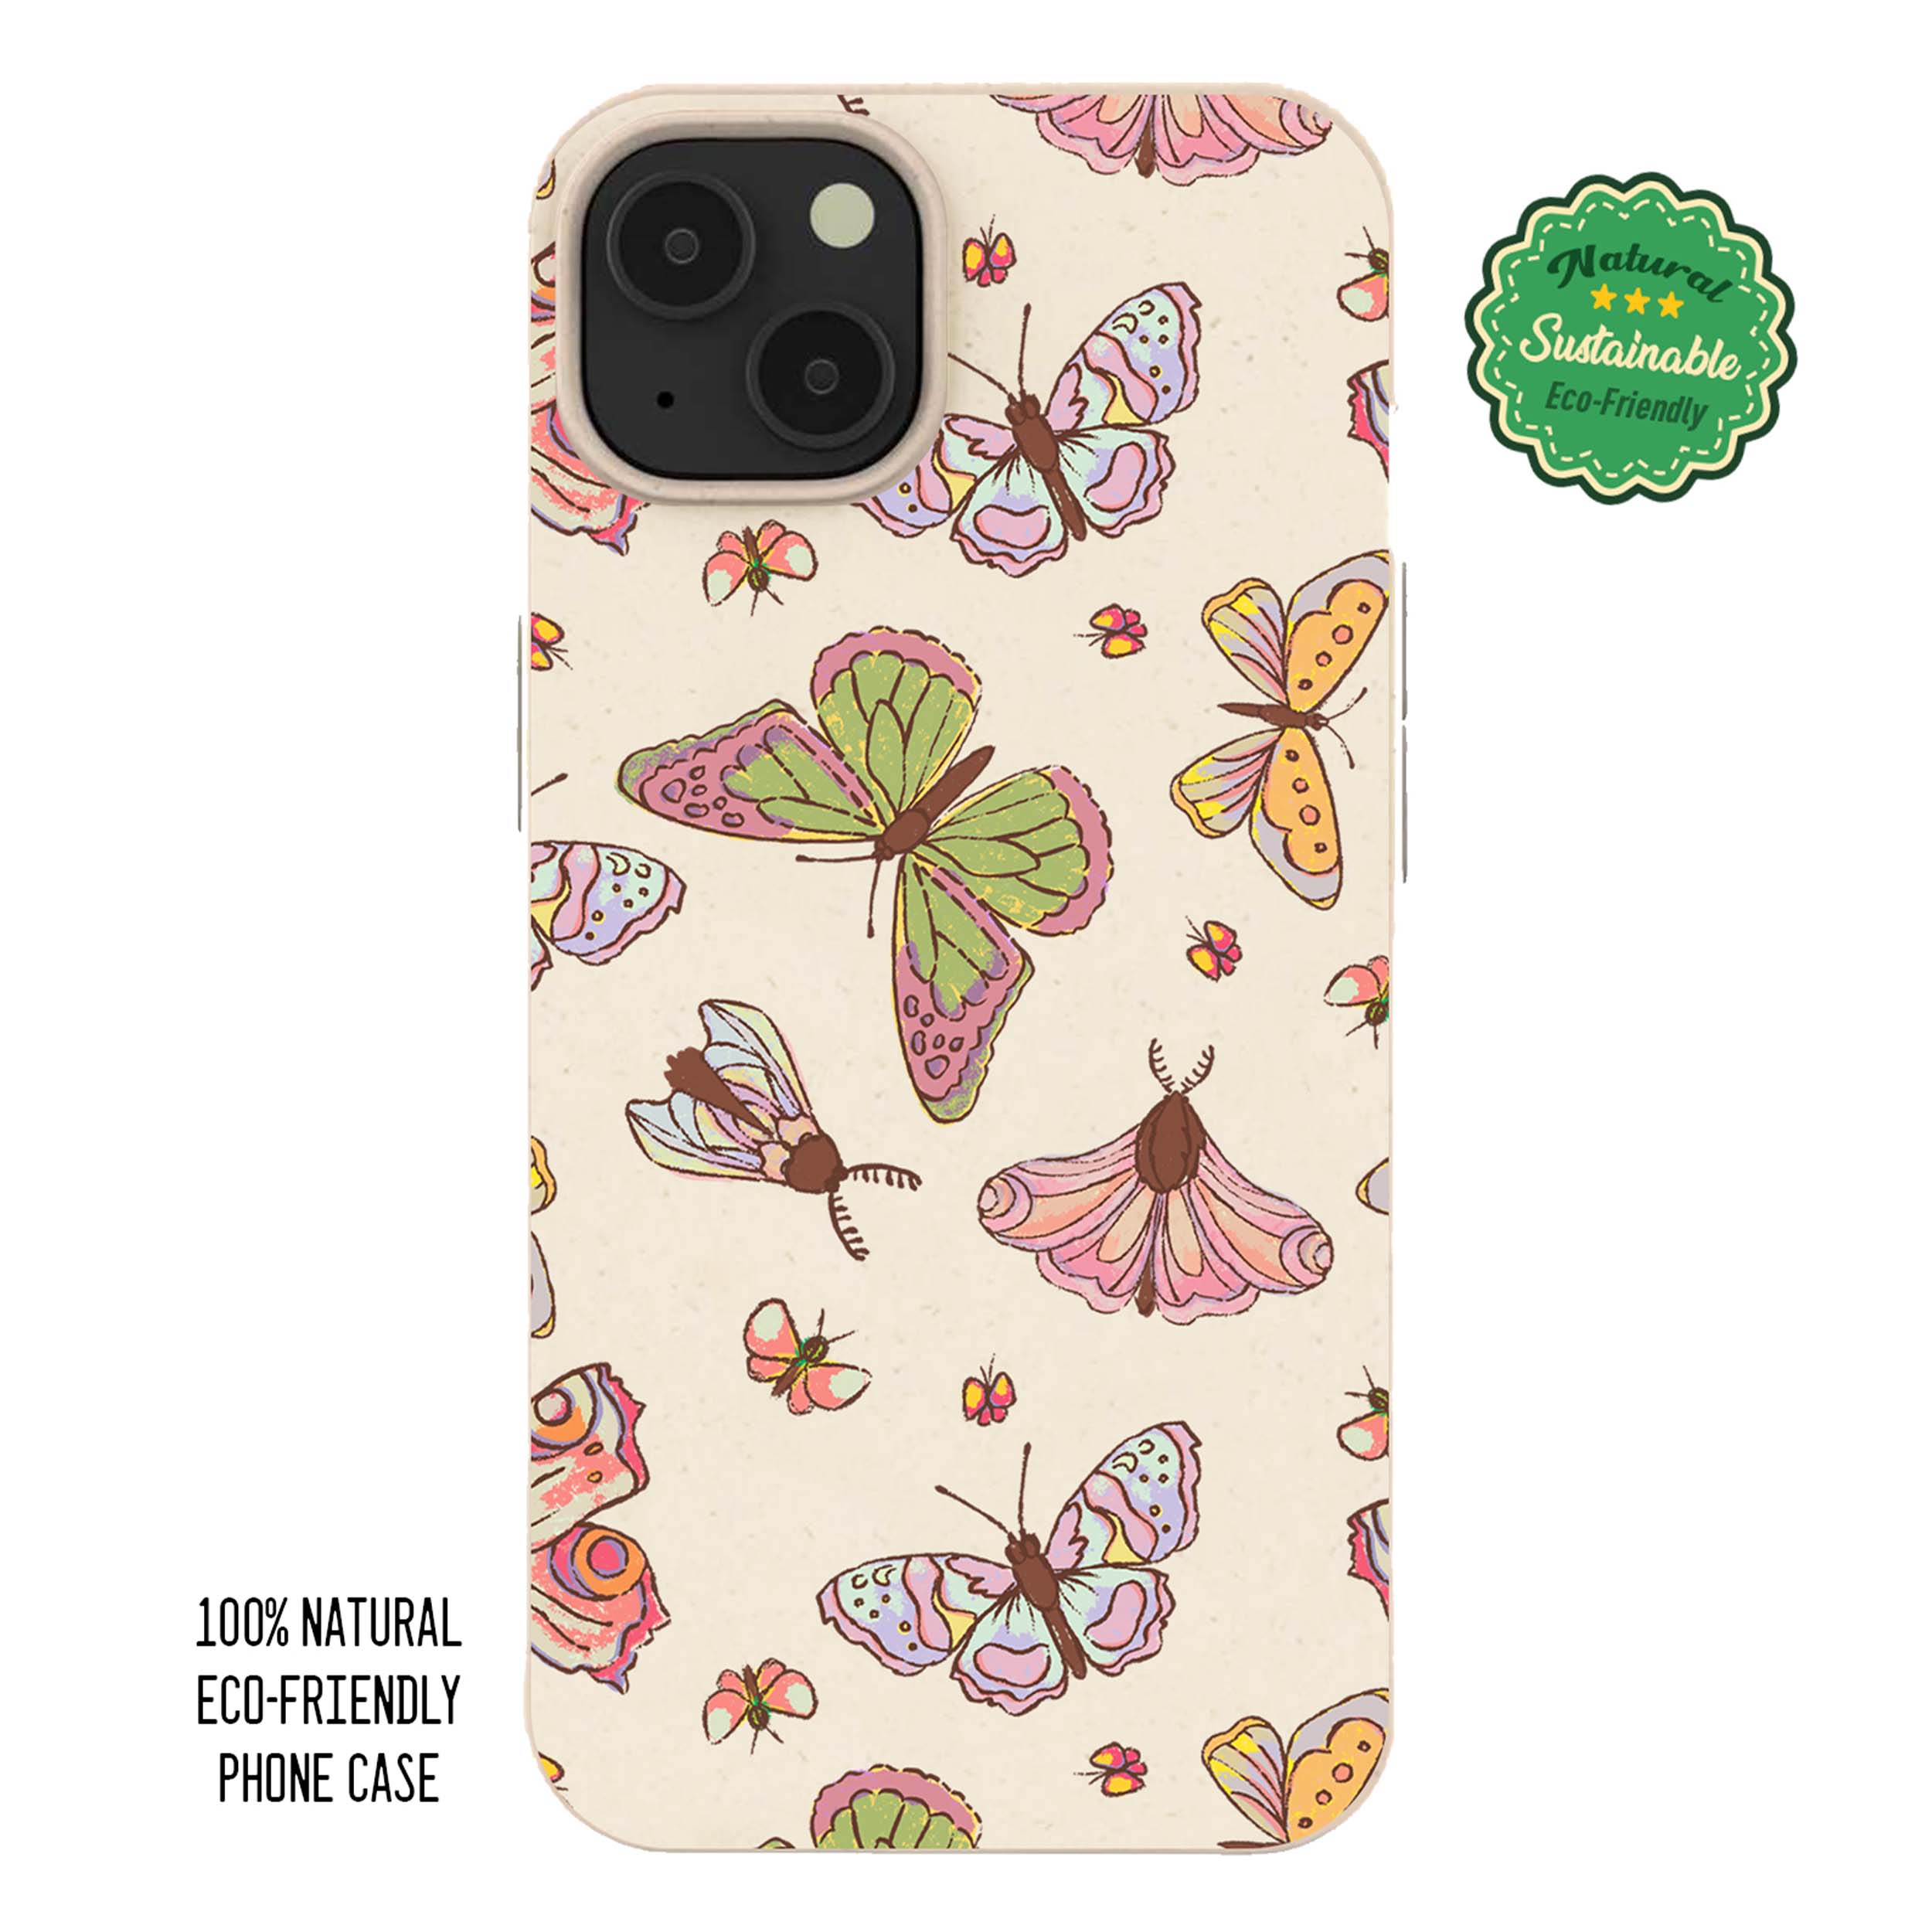 Sustainable Butterfly iPhone Case, Natural TextureMagSafe iPhone Case Cover